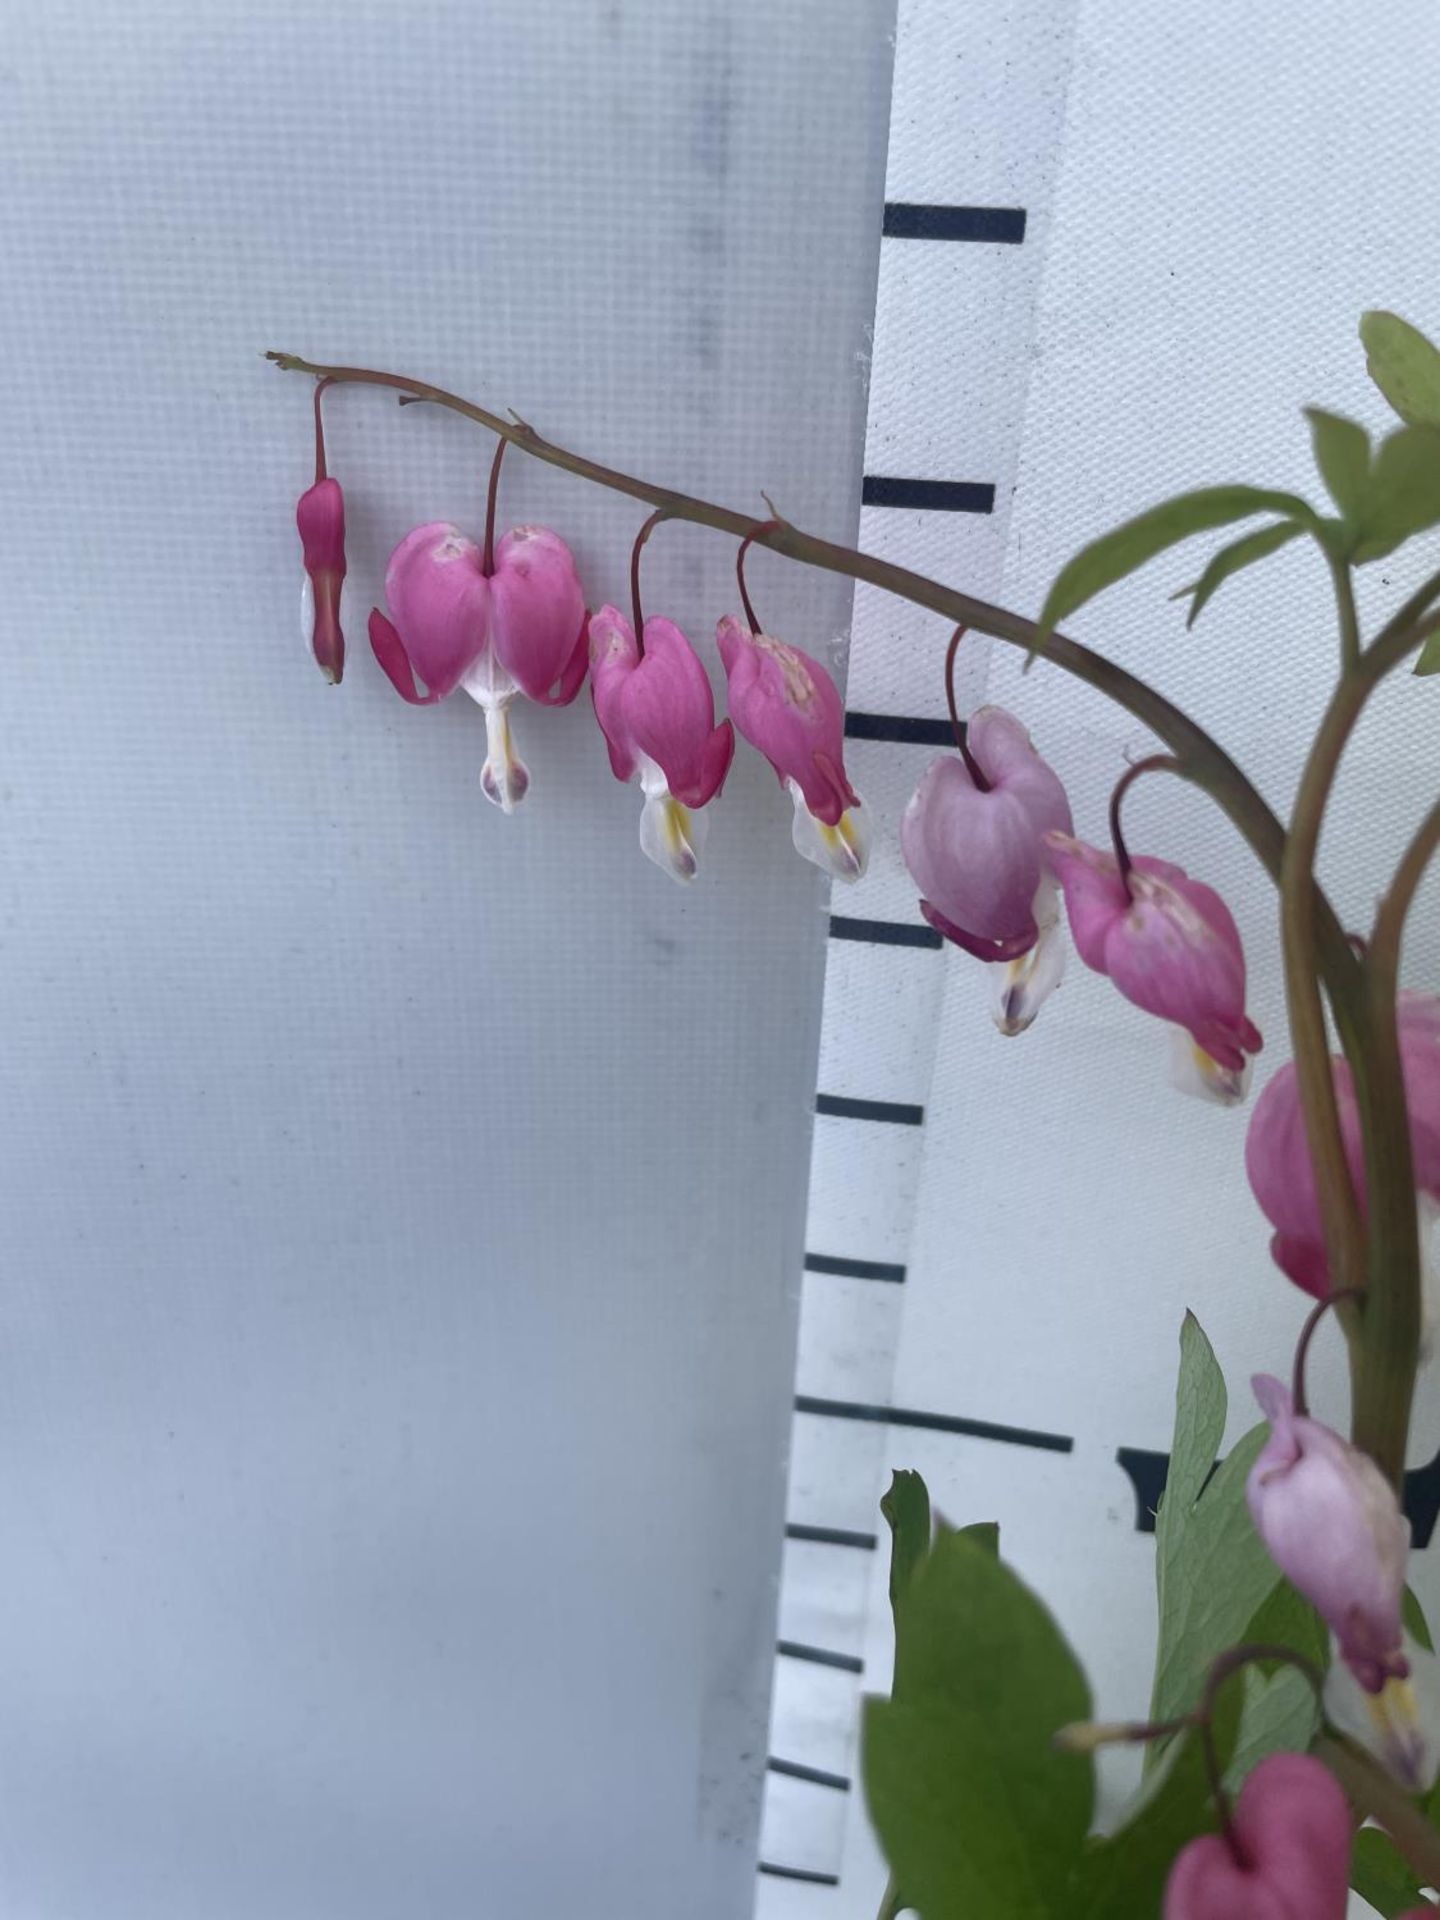 SIX DICENTRA SPECTABILIS BLEEDING HEART 50CM TALL TO BE SOLD FOR THE SIX PLUS VAT - Image 4 of 5